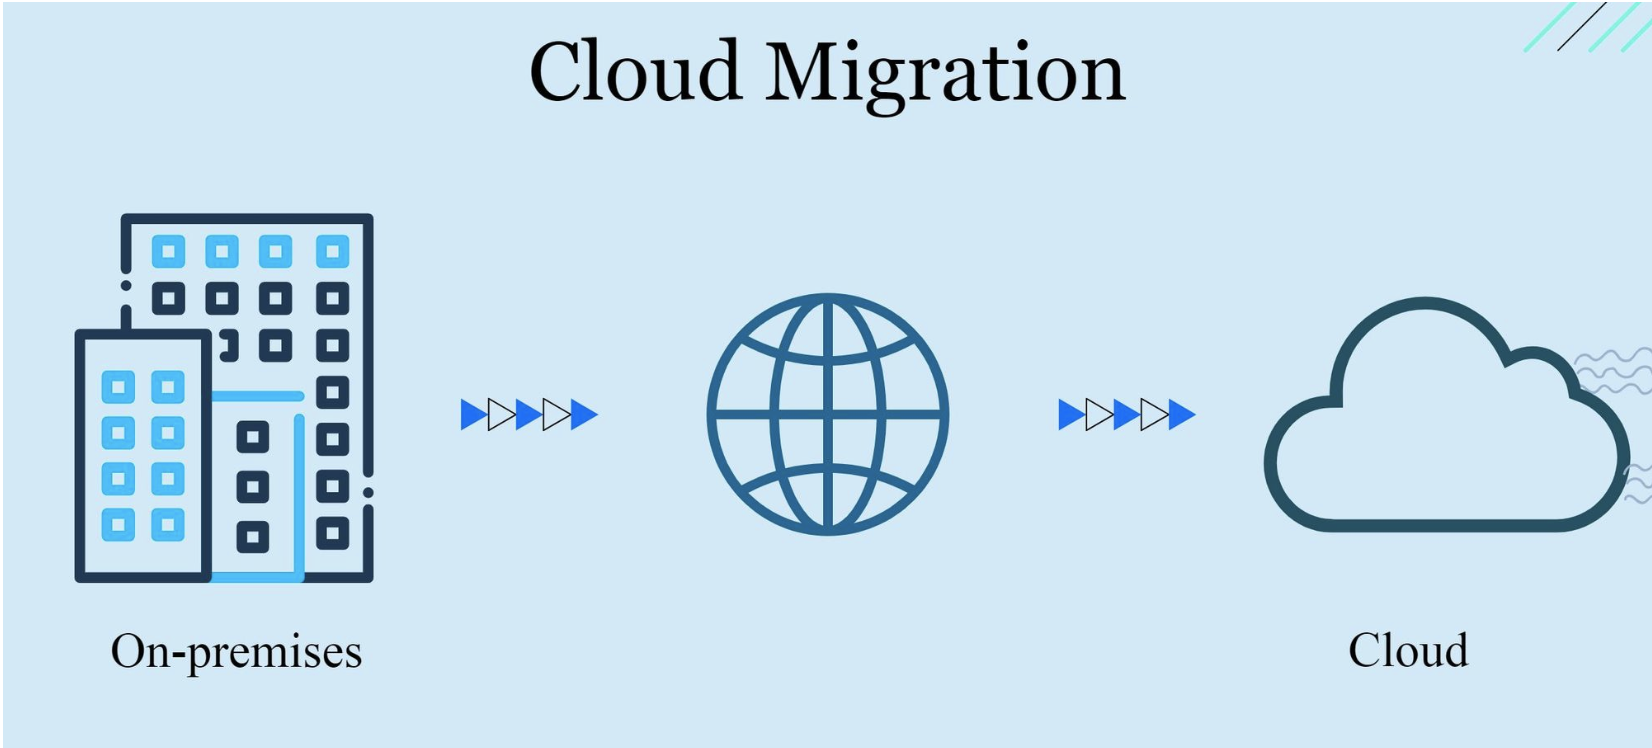 Cloud Migration: A Step-by-Step Guide